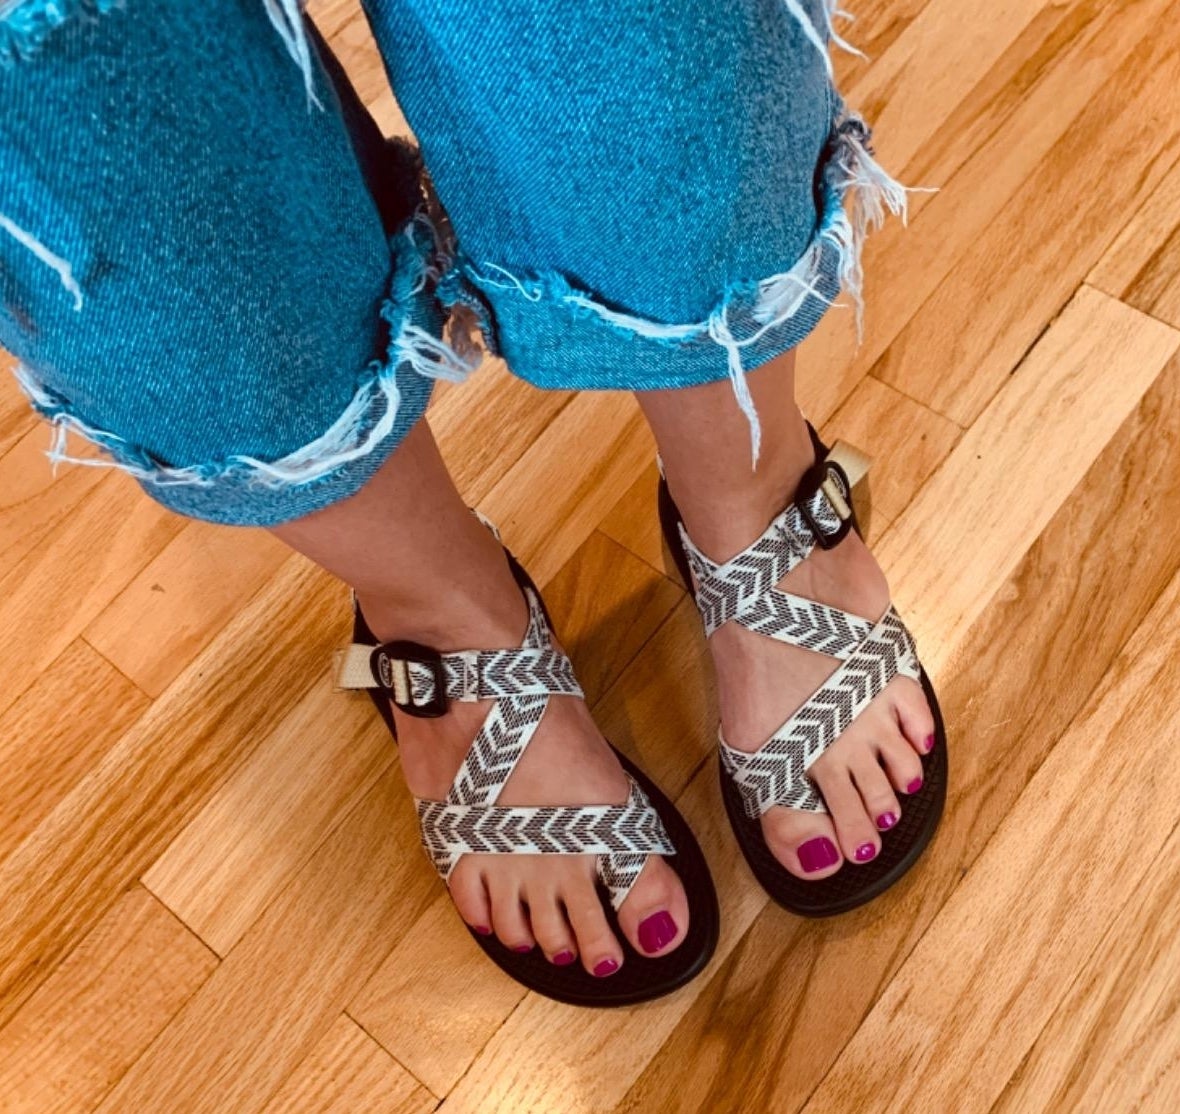 Person wearing frayed jeans and patterned sandals